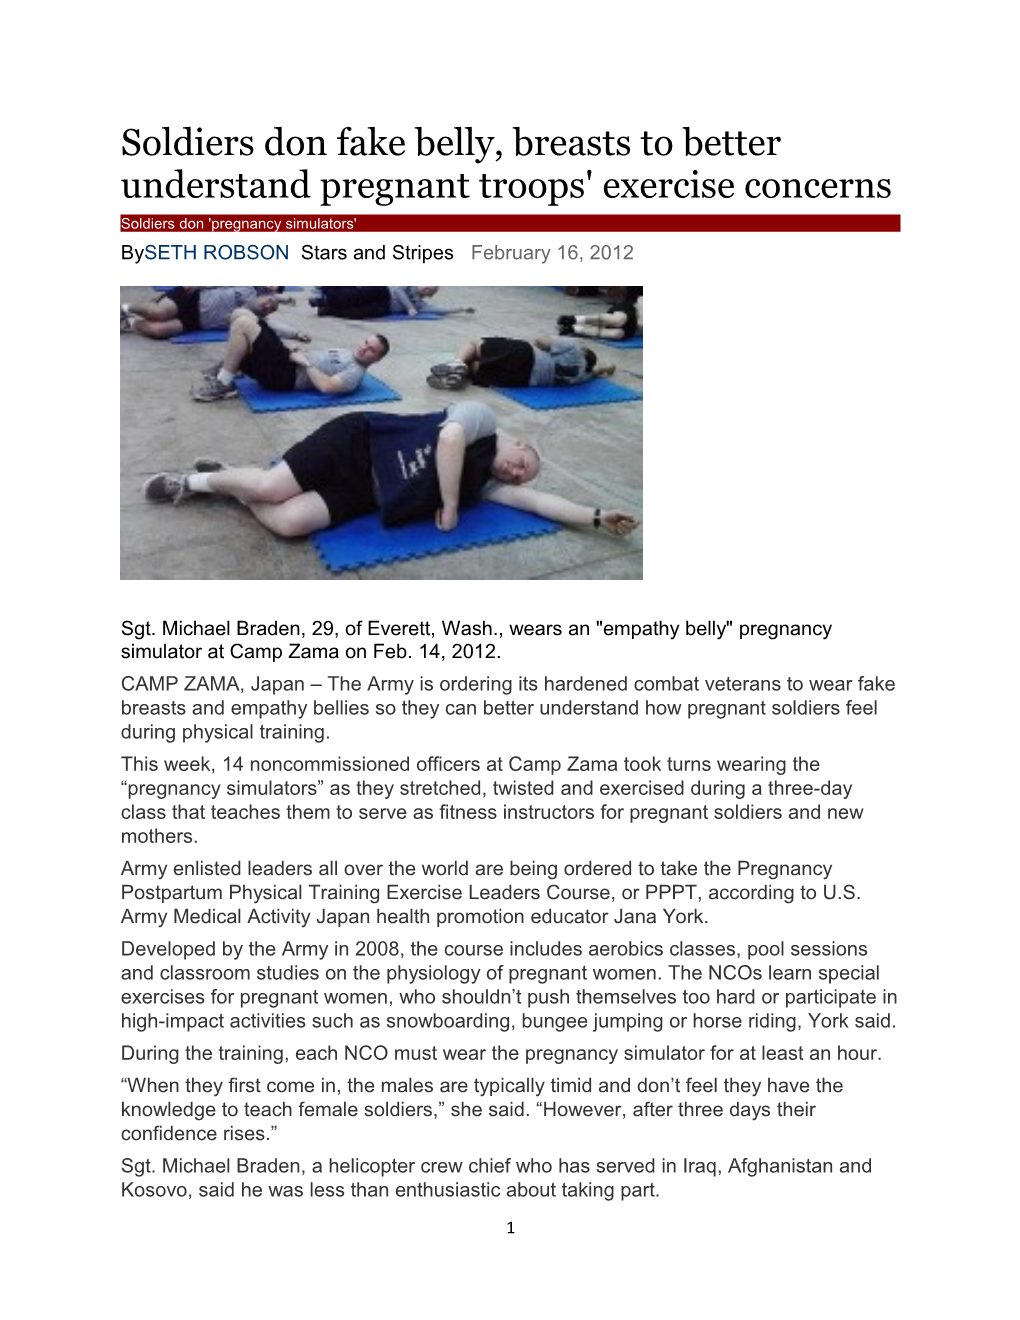 Soldiers Don Fake Belly, Breasts to Better Understand Pregnant Troops' Exercise Concerns